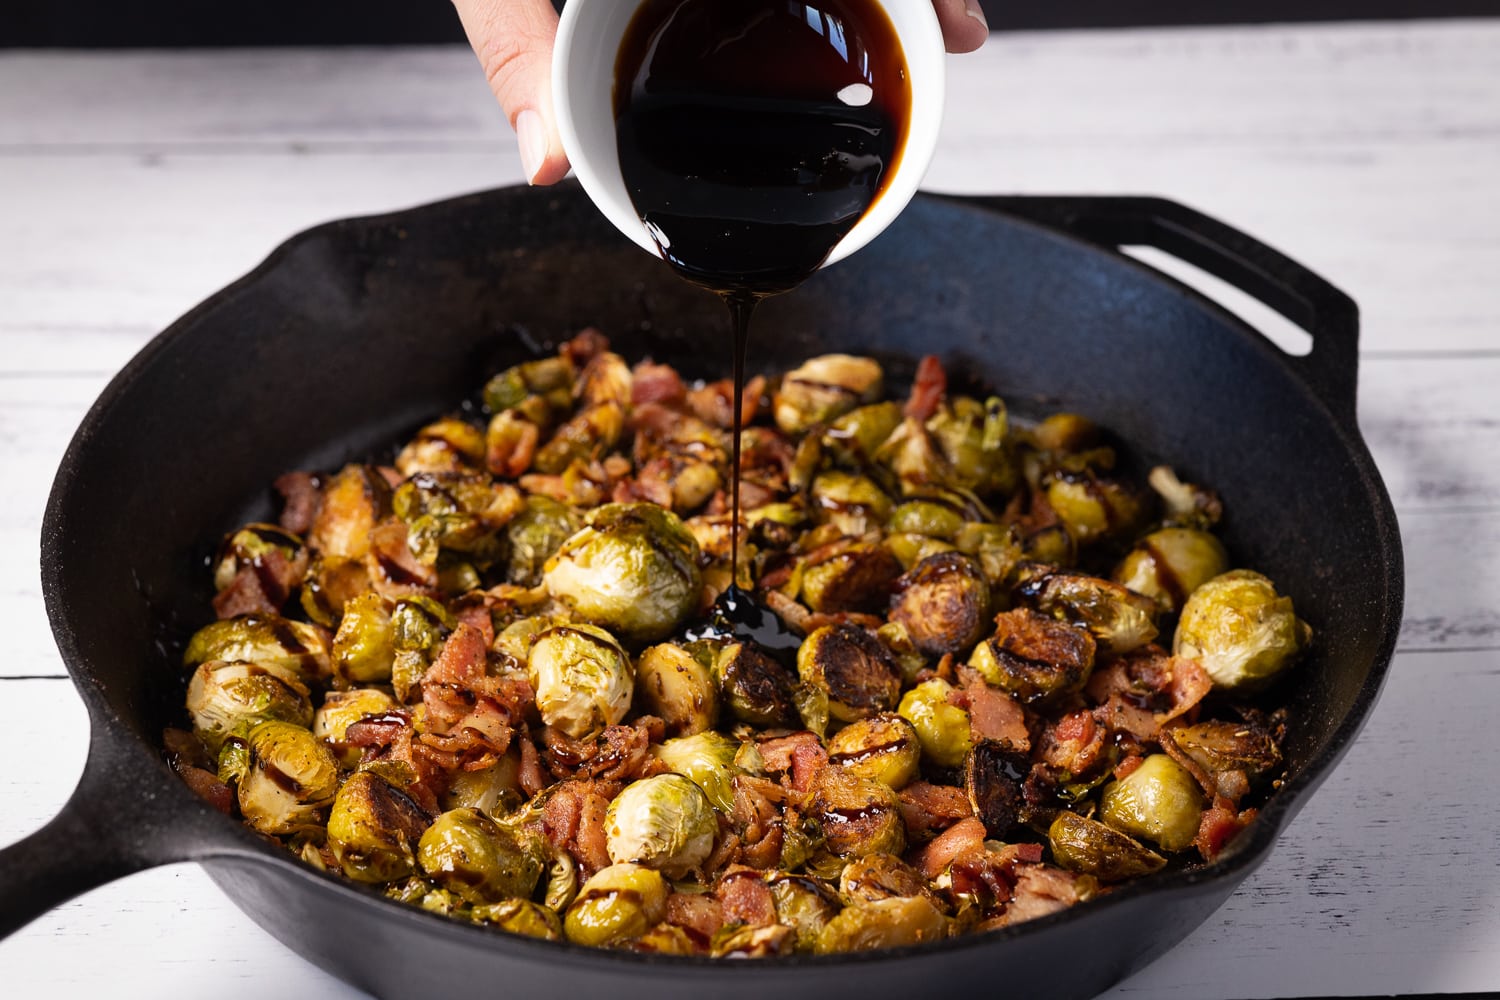 Balsamic glaze being poured into a skillet of smoked Brussels sprouts and bacon.